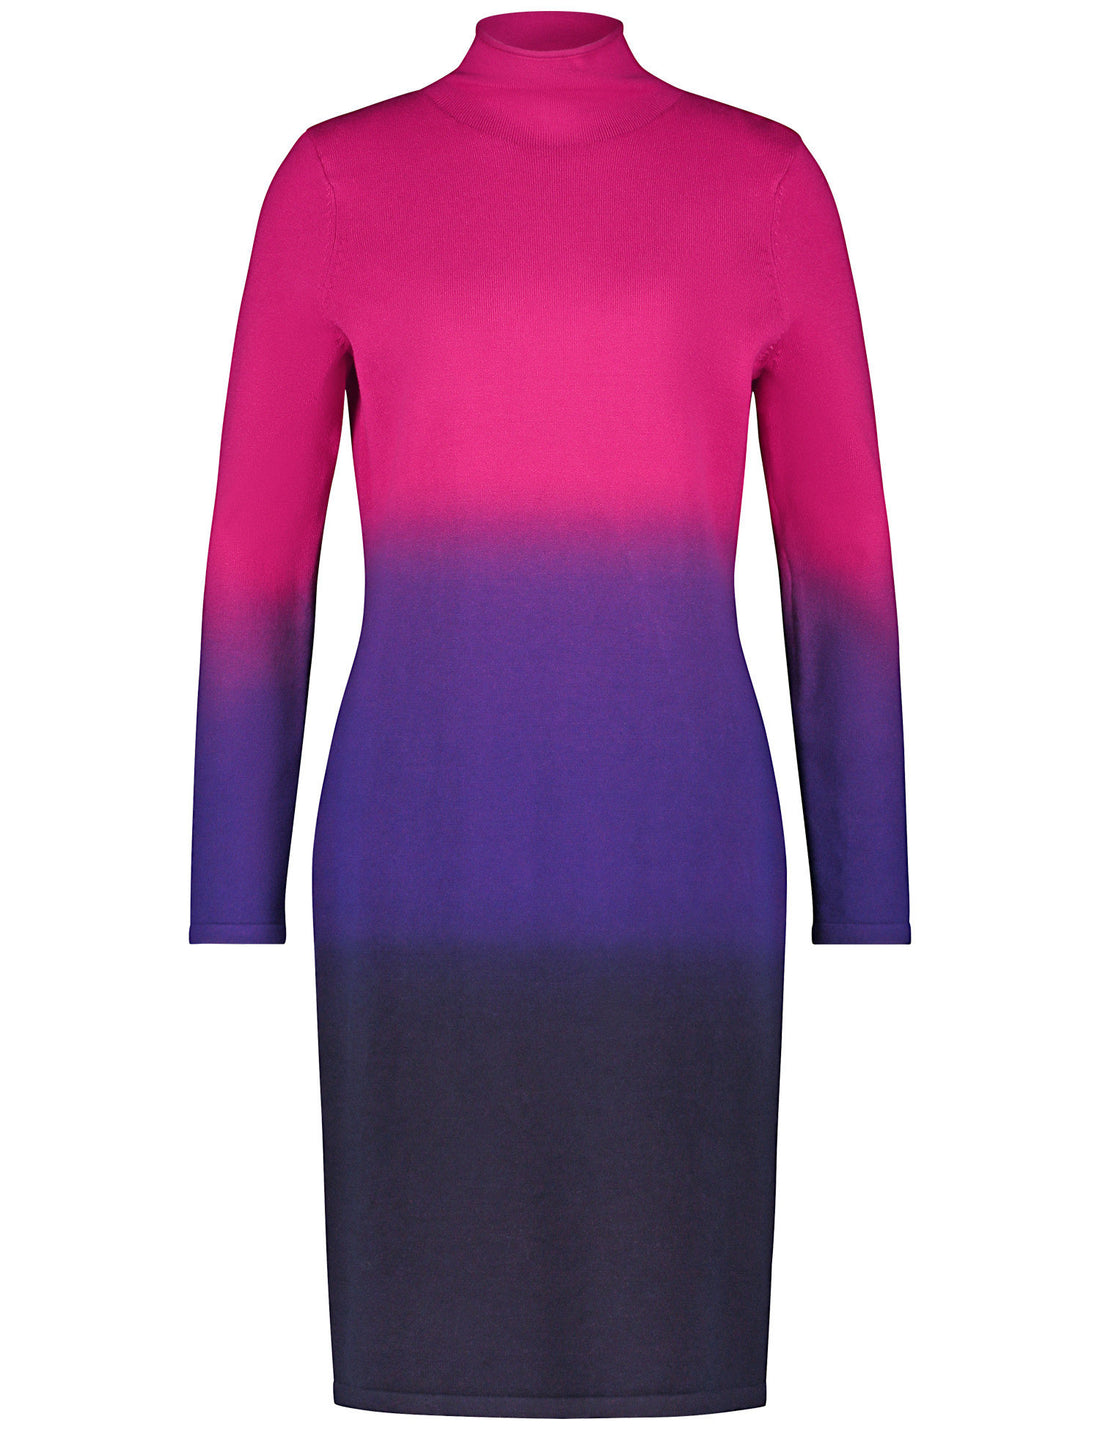 Knitted Dress With A Stand-Up Collar And Colour Graduation_280053-35708_3038_02